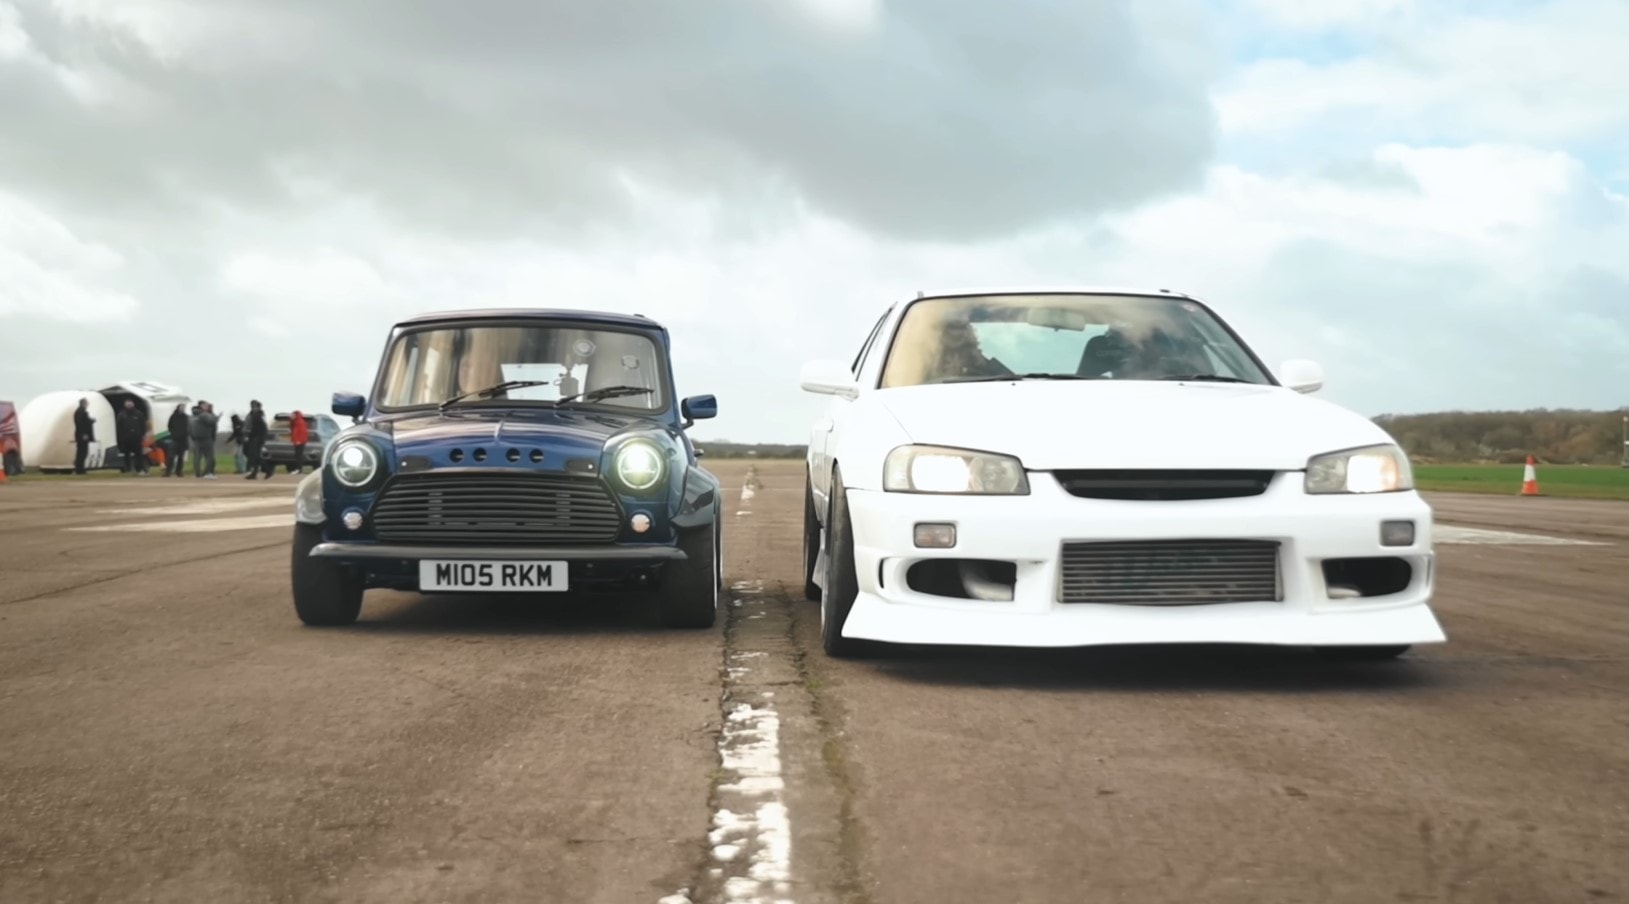 This Weird Drag Race Sees a K20-Swapped Mini Absolutely Walk an